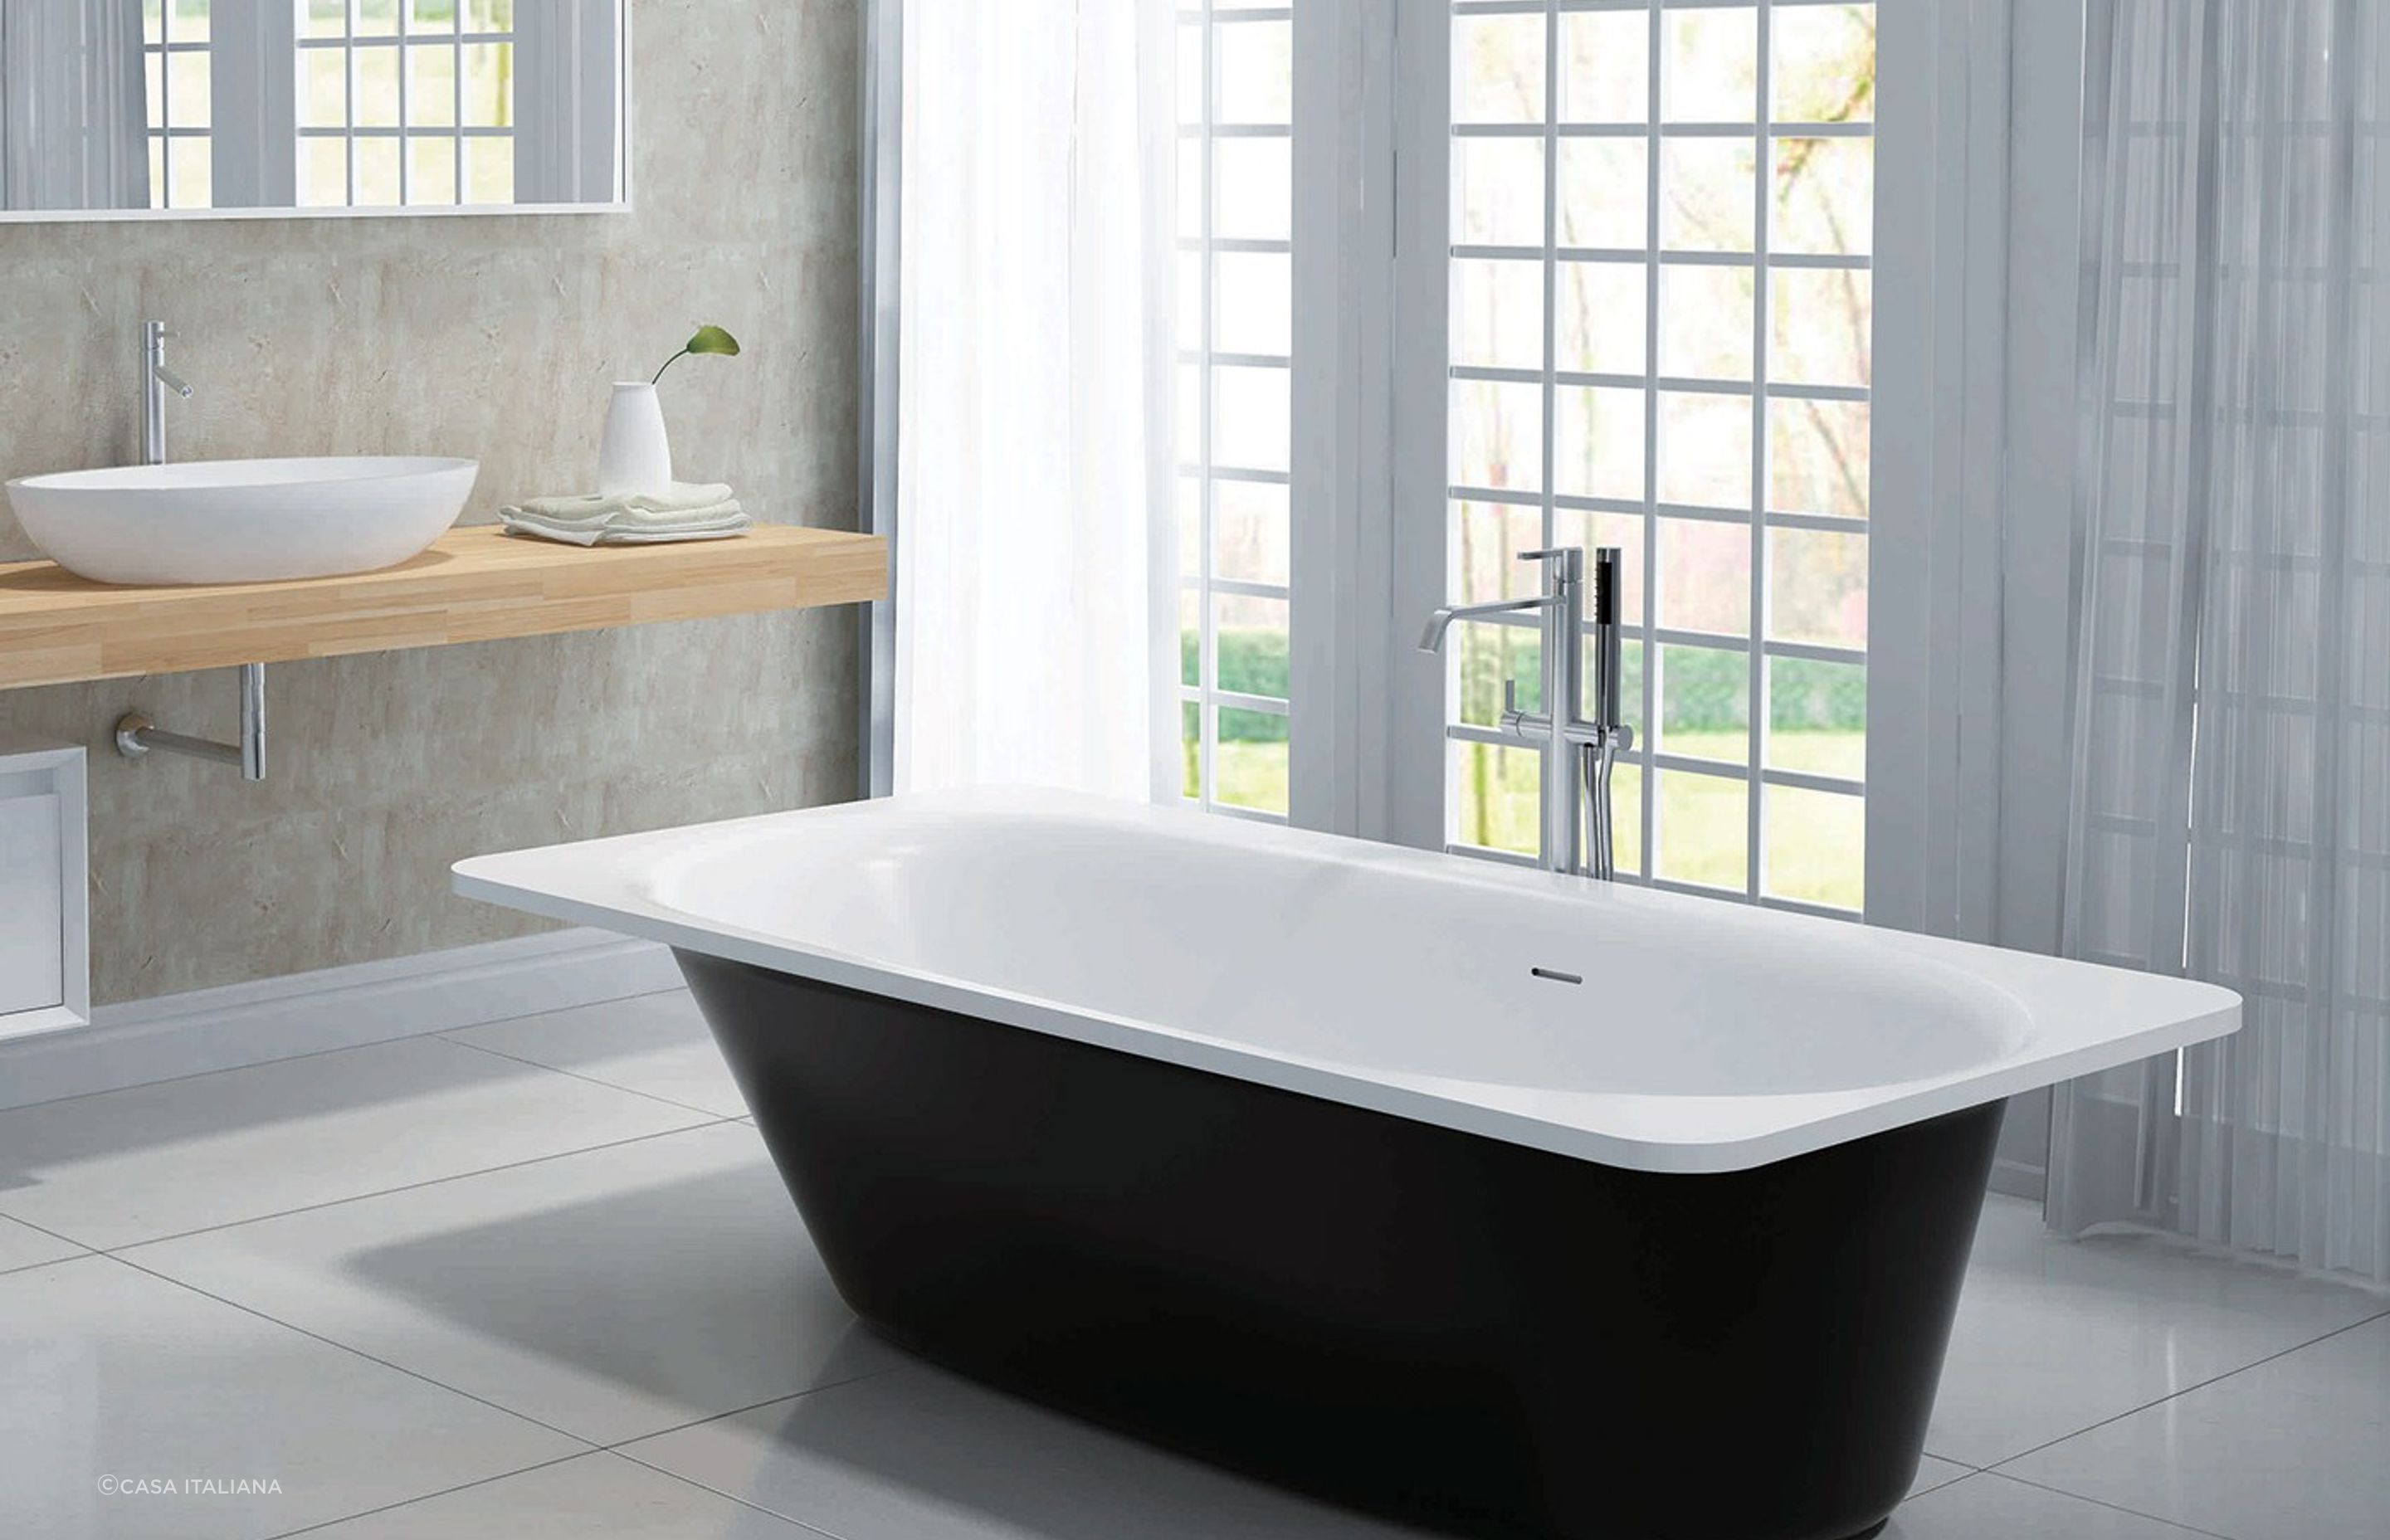 With its almost tapered design, the California Bath is an elegant way to enhance the illusion of space